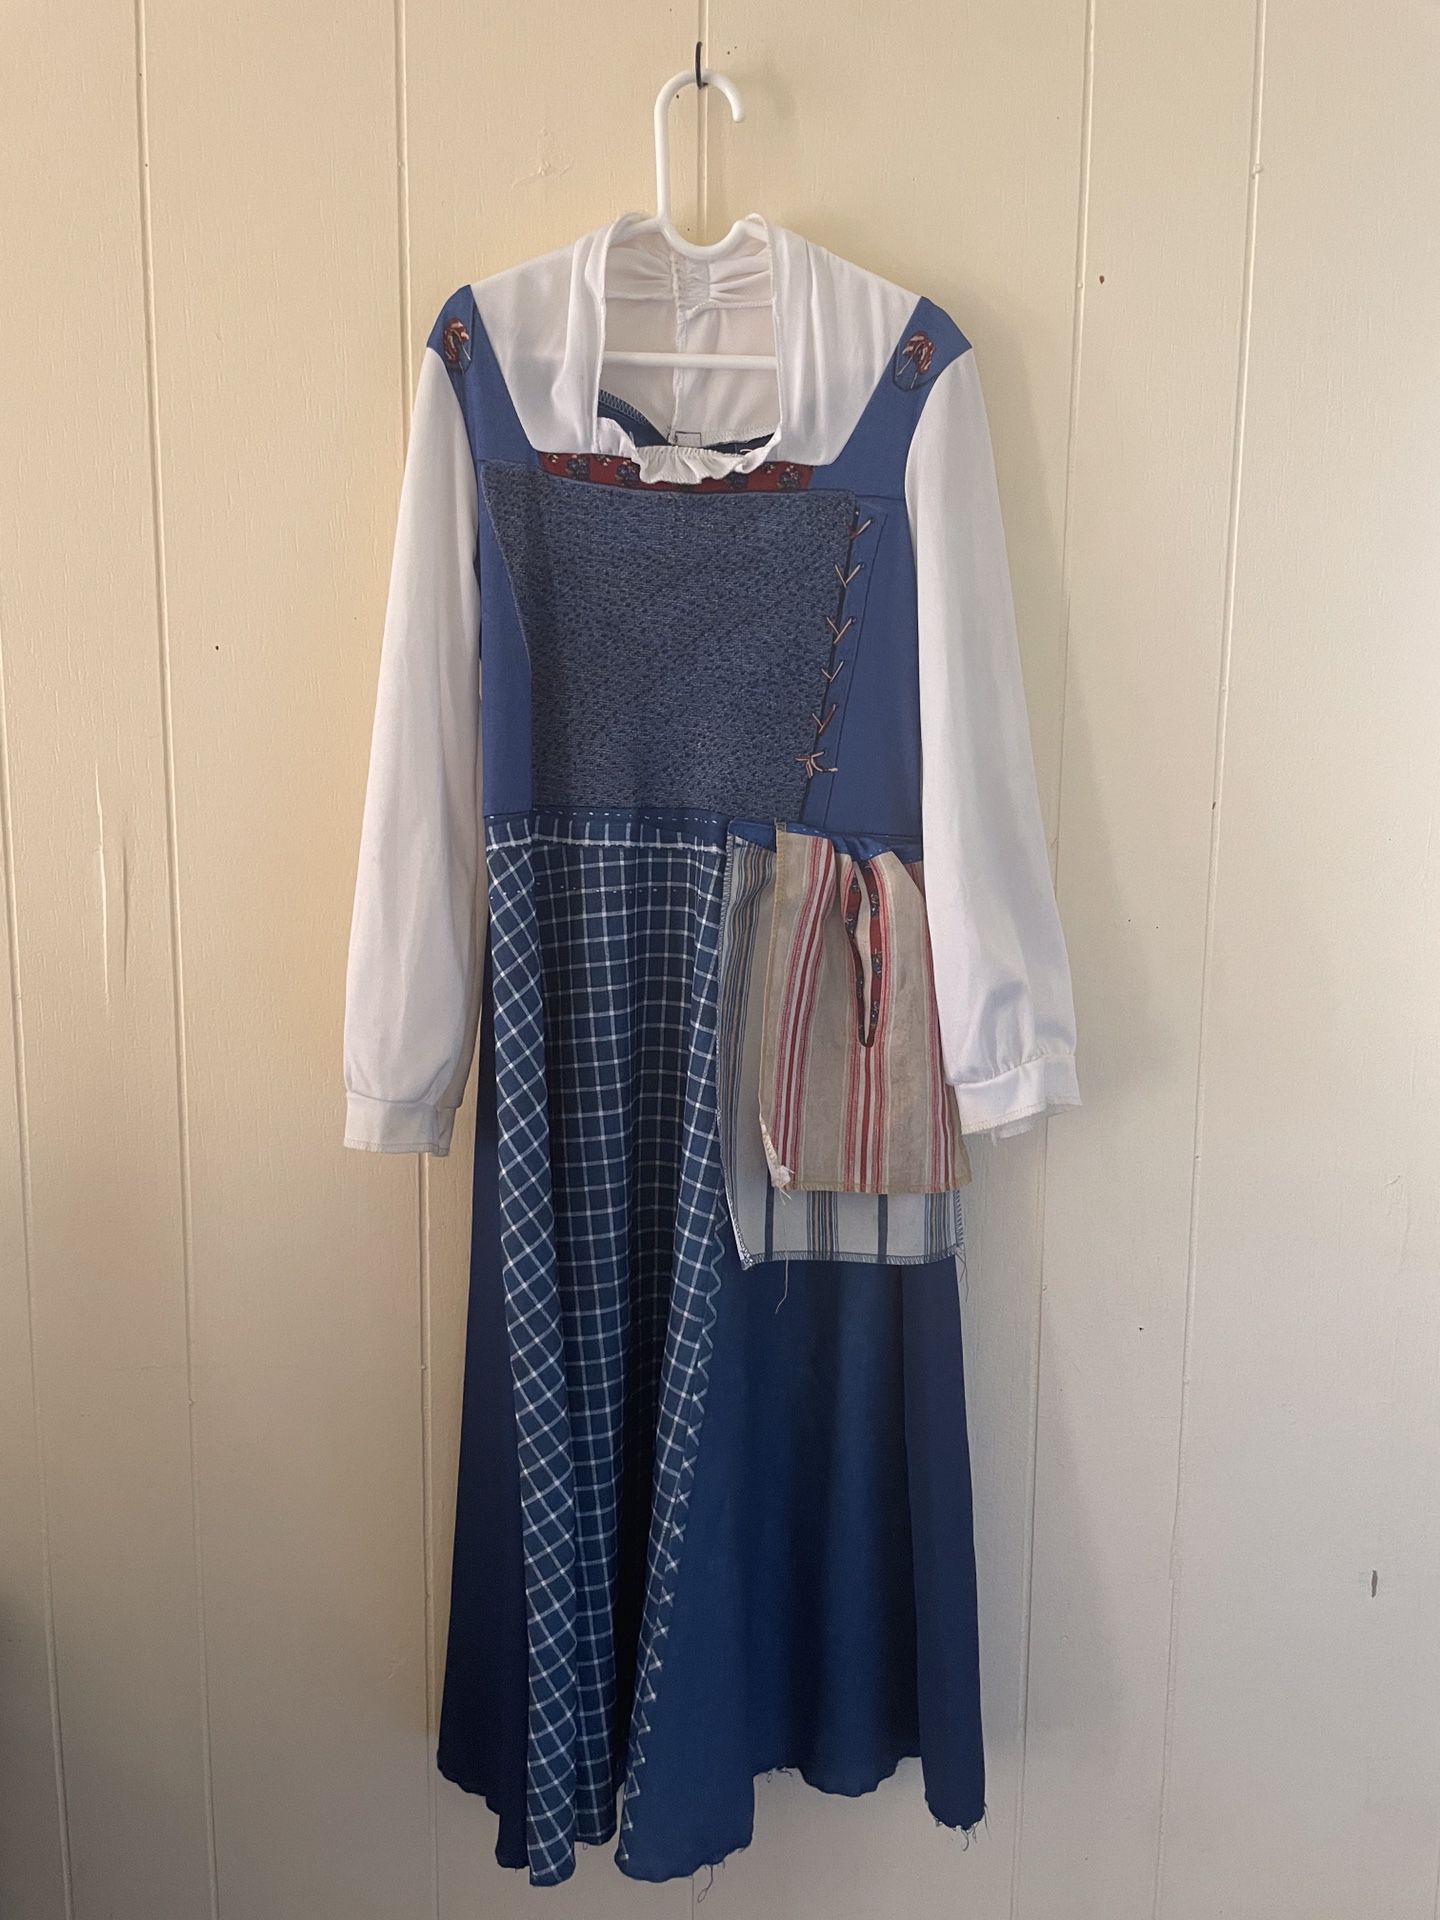 Town Belle Costume - Beauty and the Beast Movie Size 7-8